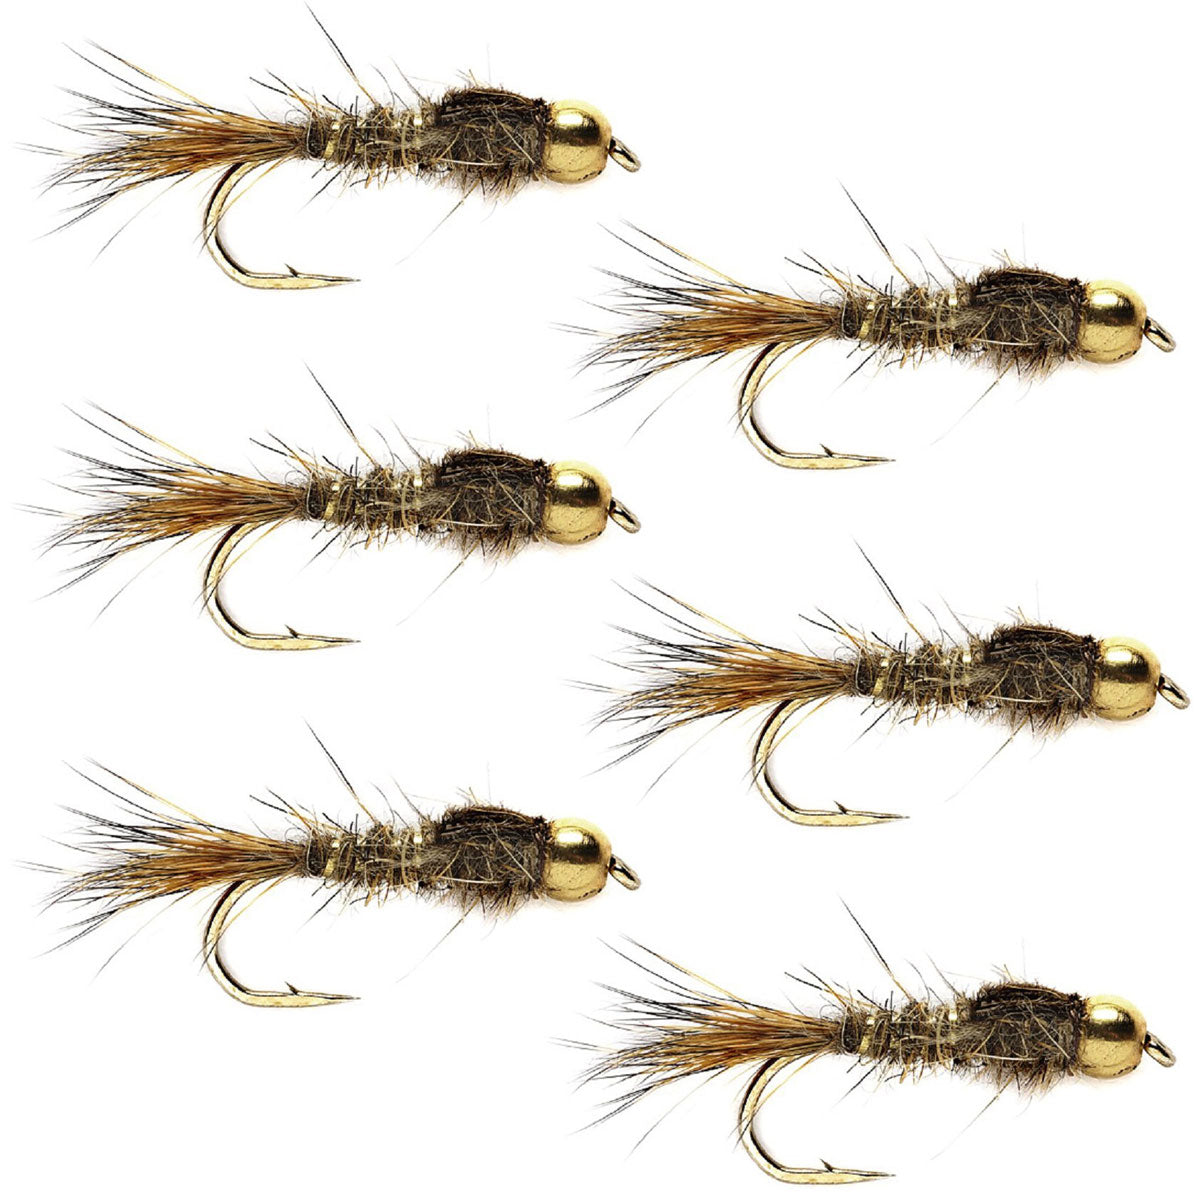 Tungsten Bead Head Gold Ribbed Hare's Ear Trout Fly - Nymph Wet Fly - 6 Flies Hook Size 18